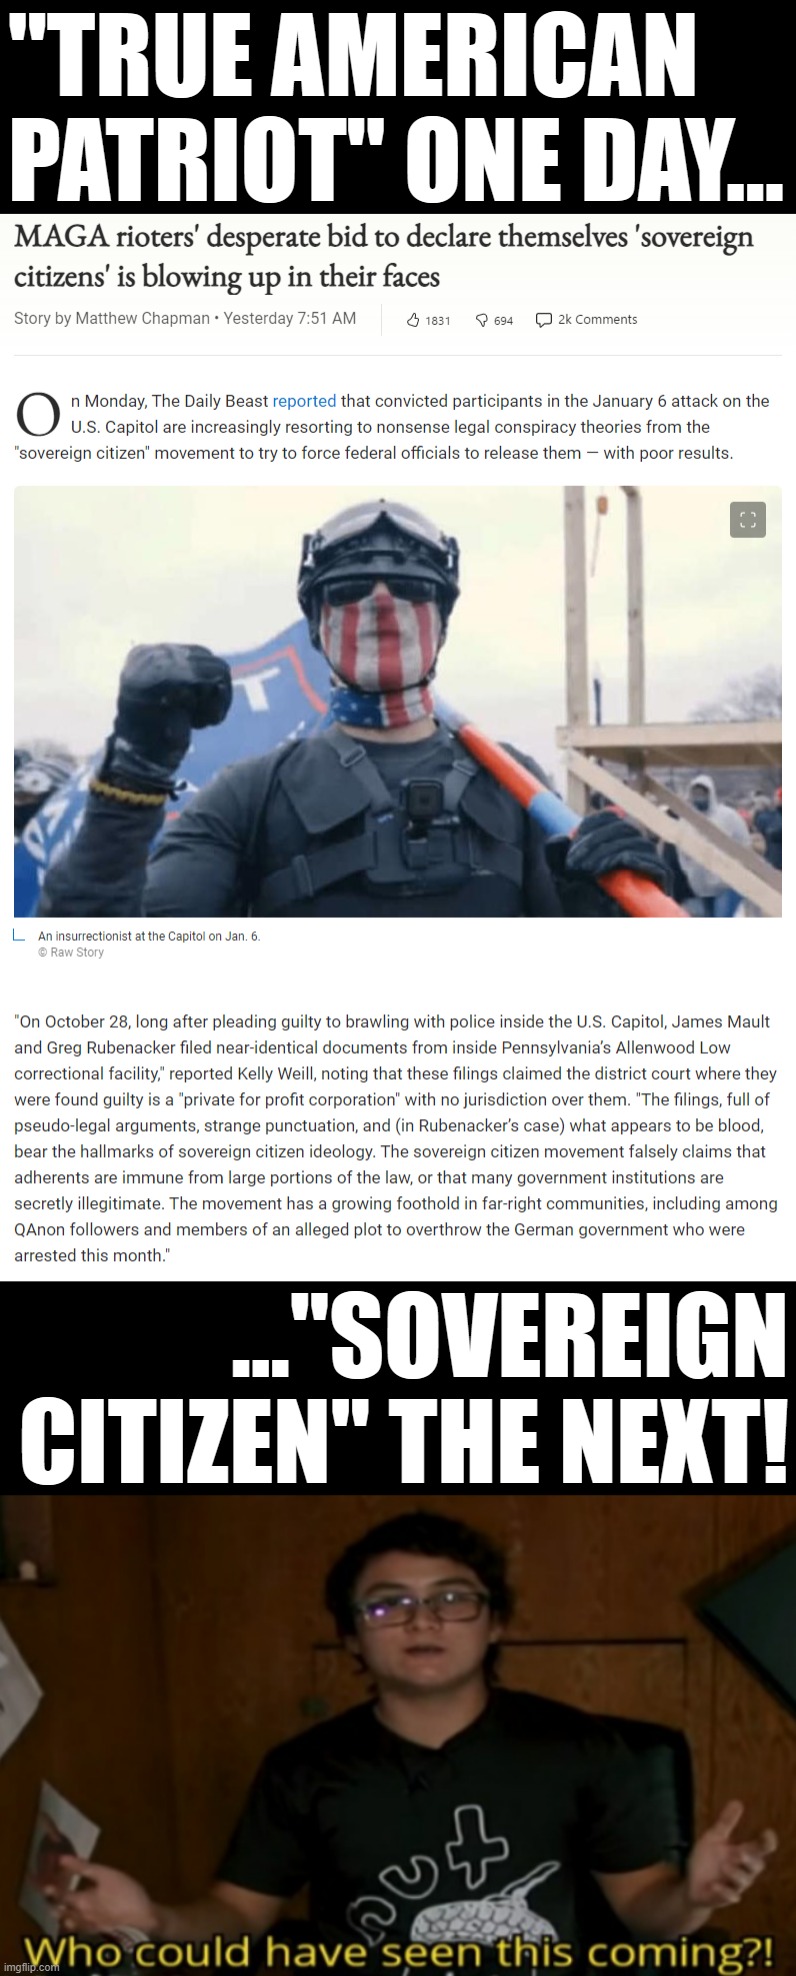 Disclaiming any association with the United States in a doomed bid to evade the consequences of their actions? That's so weird | "TRUE AMERICAN PATRIOT" ONE DAY... ..."SOVEREIGN CITIZEN" THE NEXT! | image tagged in jan 6 maga rioters claim sovereign citizenship,who could have seen this coming,jan 6,rioters,traitors,treason | made w/ Imgflip meme maker